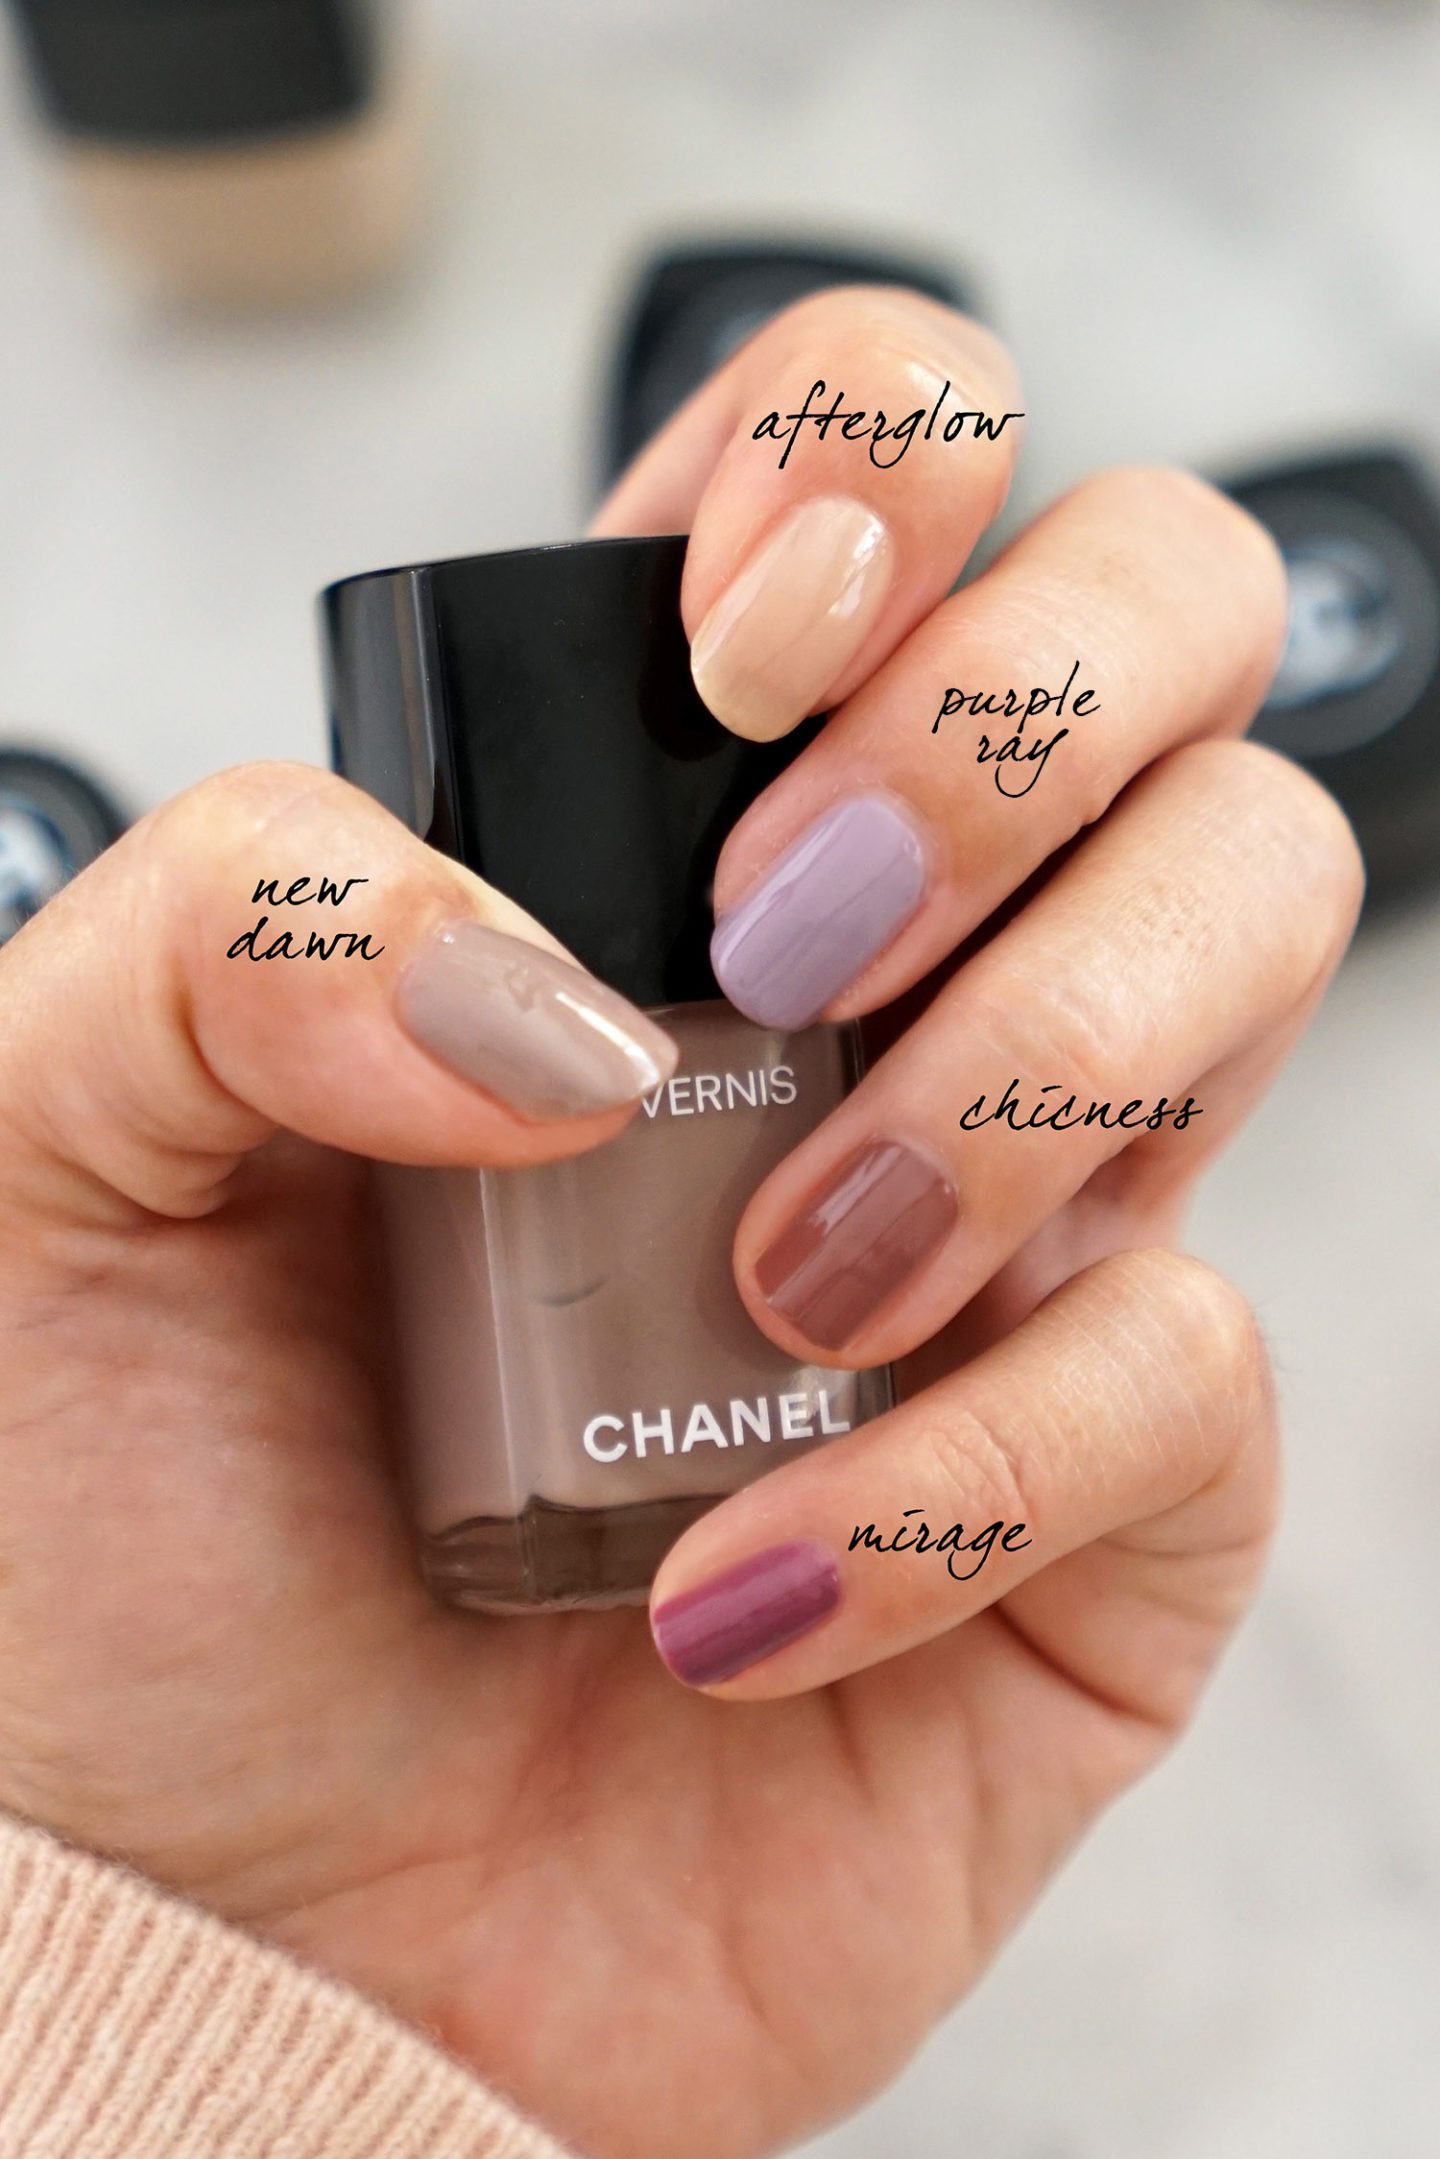 Chanel Le Vernis New Dawn, Afterglow, Purple Ray, Chicness and Mirage